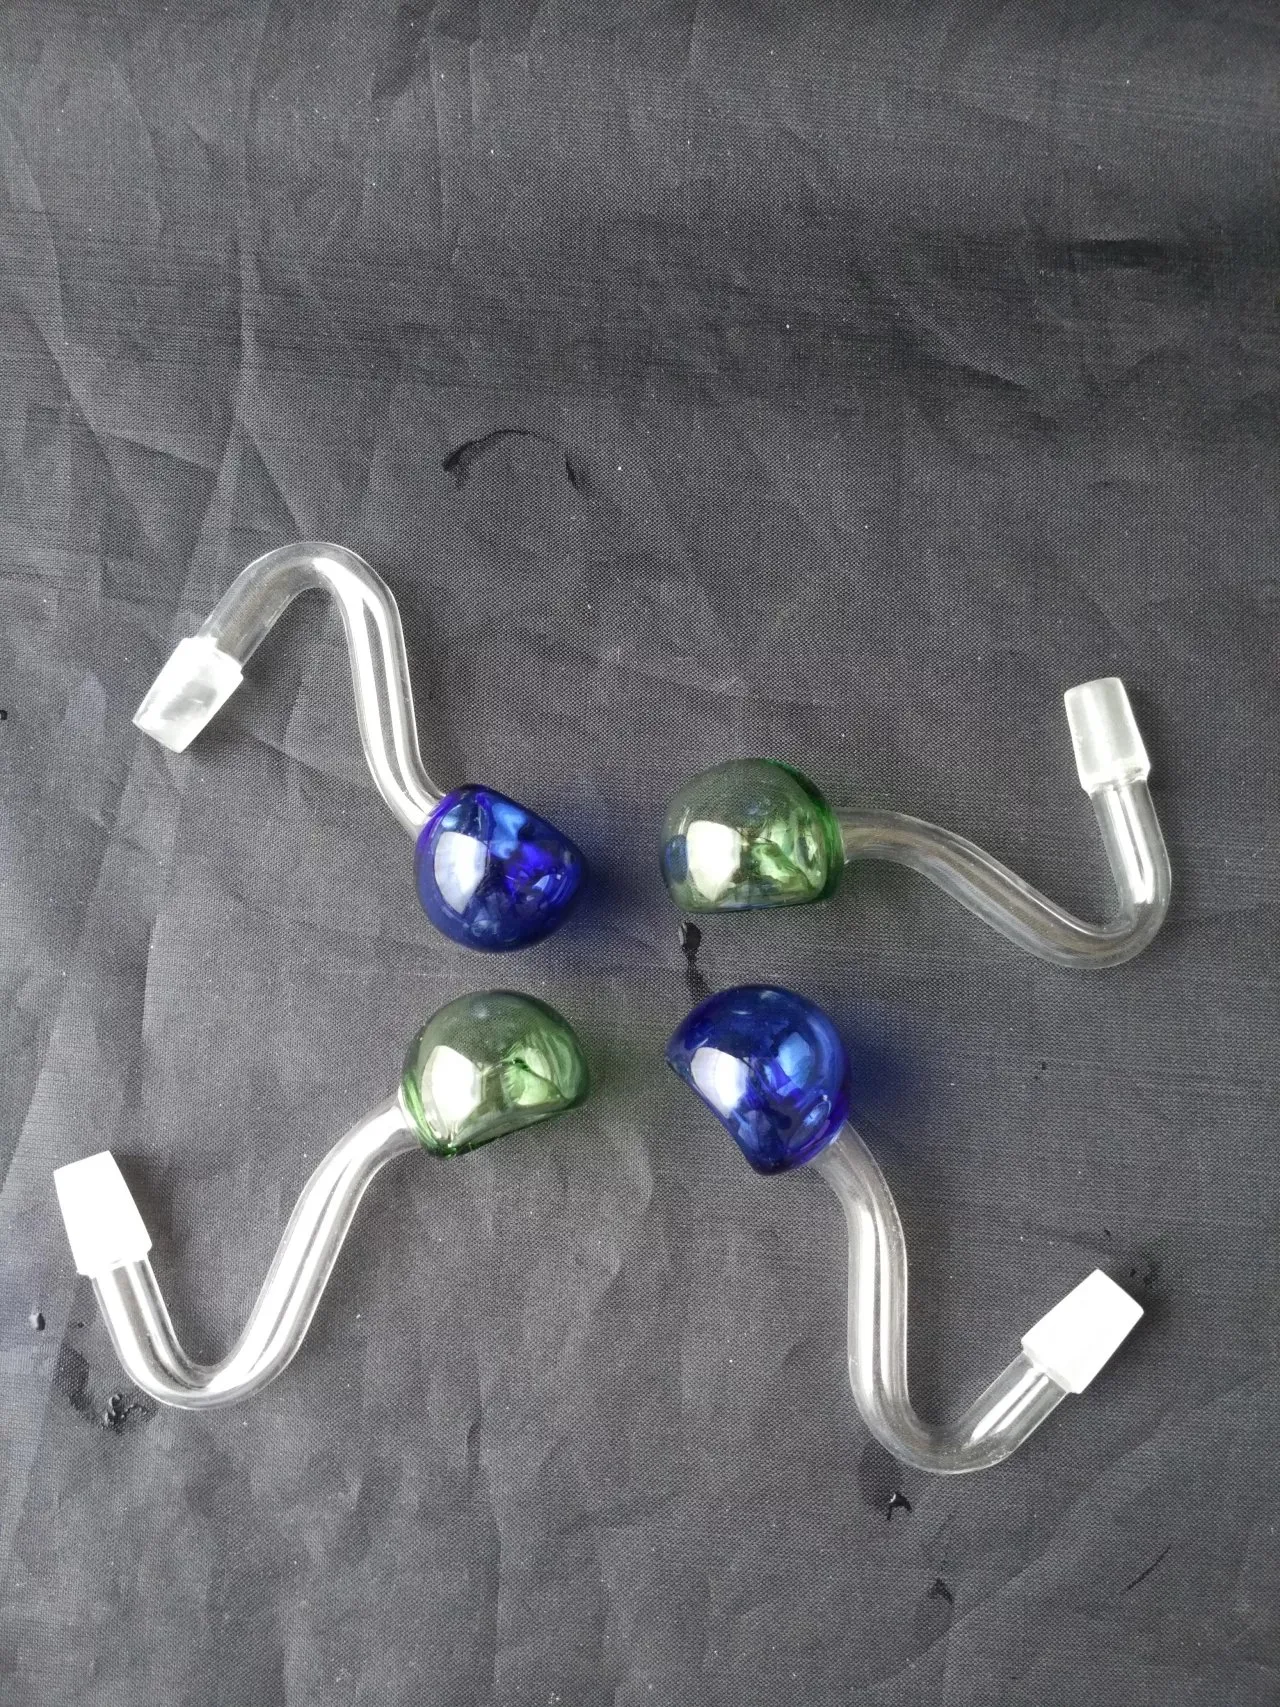 Porcelain glass water pipe accessories , Water pipes glass bongs hooakahs two functions for oil rigs glass bongs